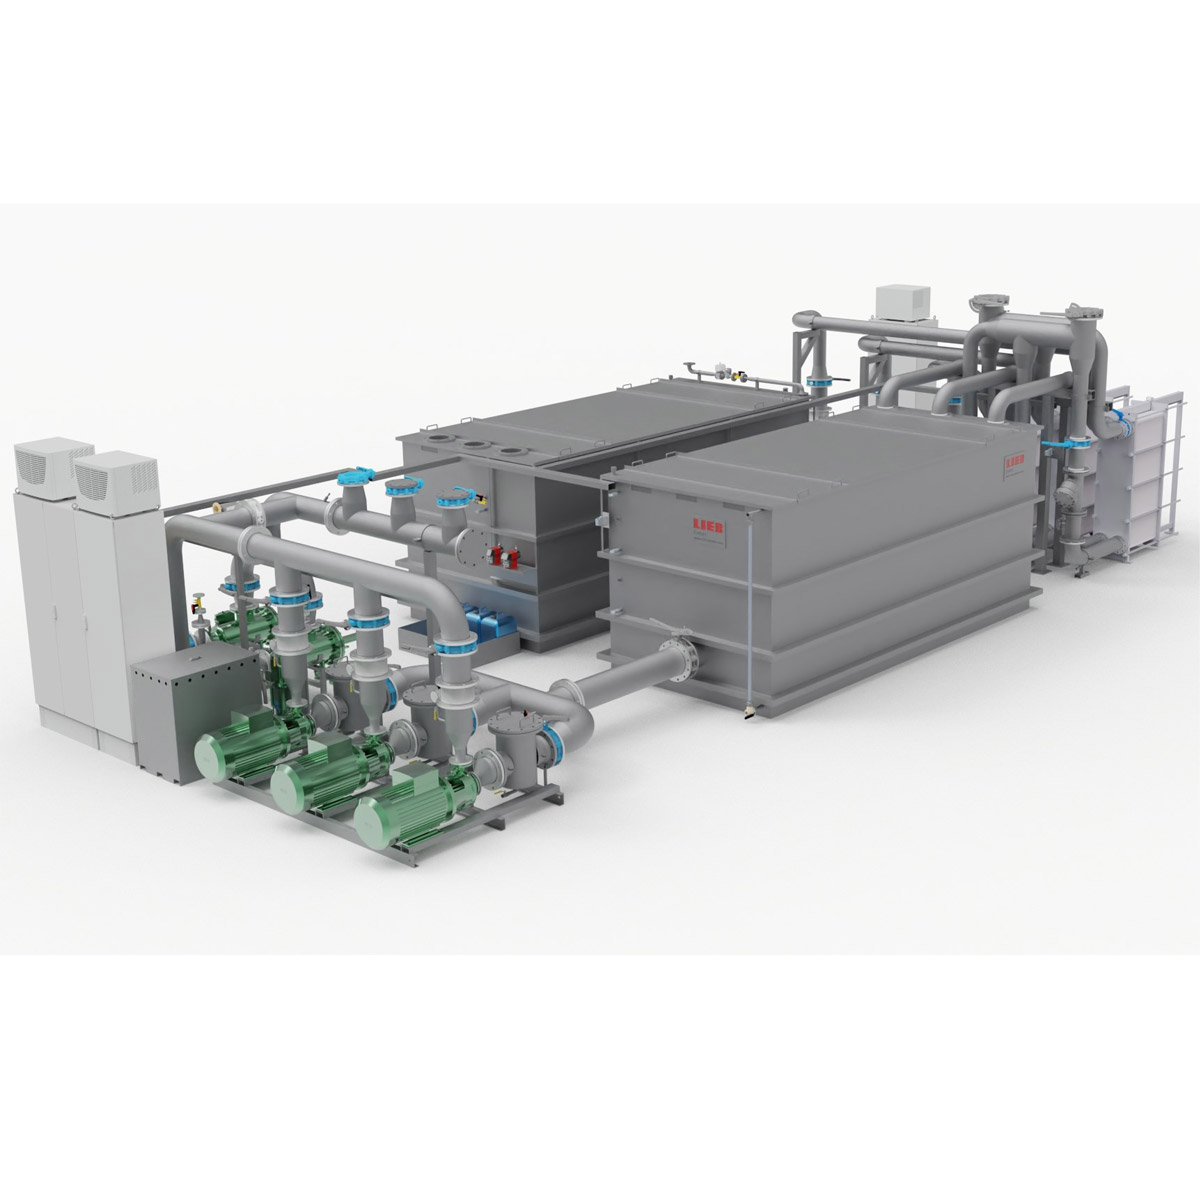 Process- cooling water systems for casting machines (volume flow: 284 m³/h)